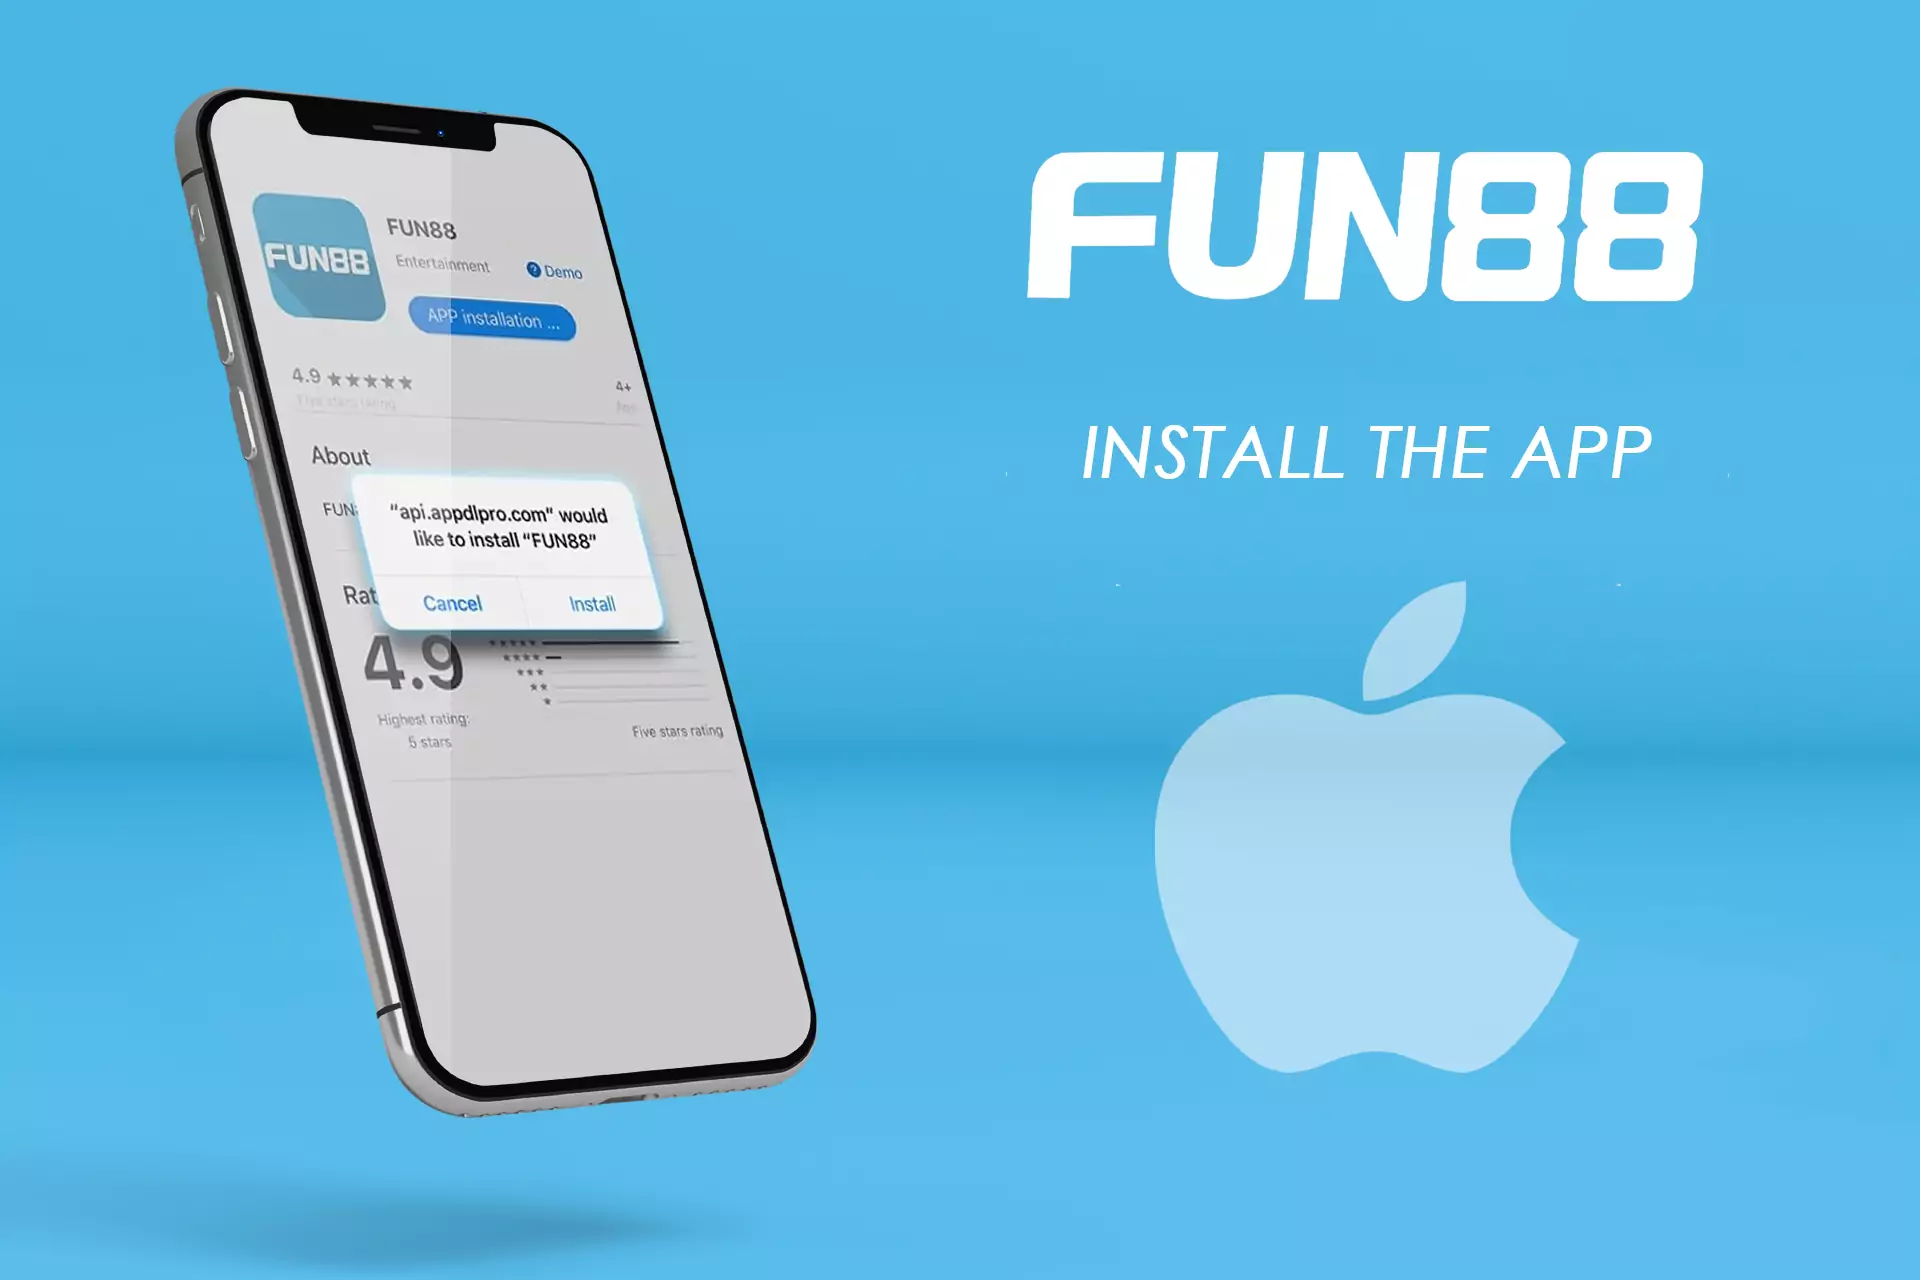 Install the app version for iOS and run it.